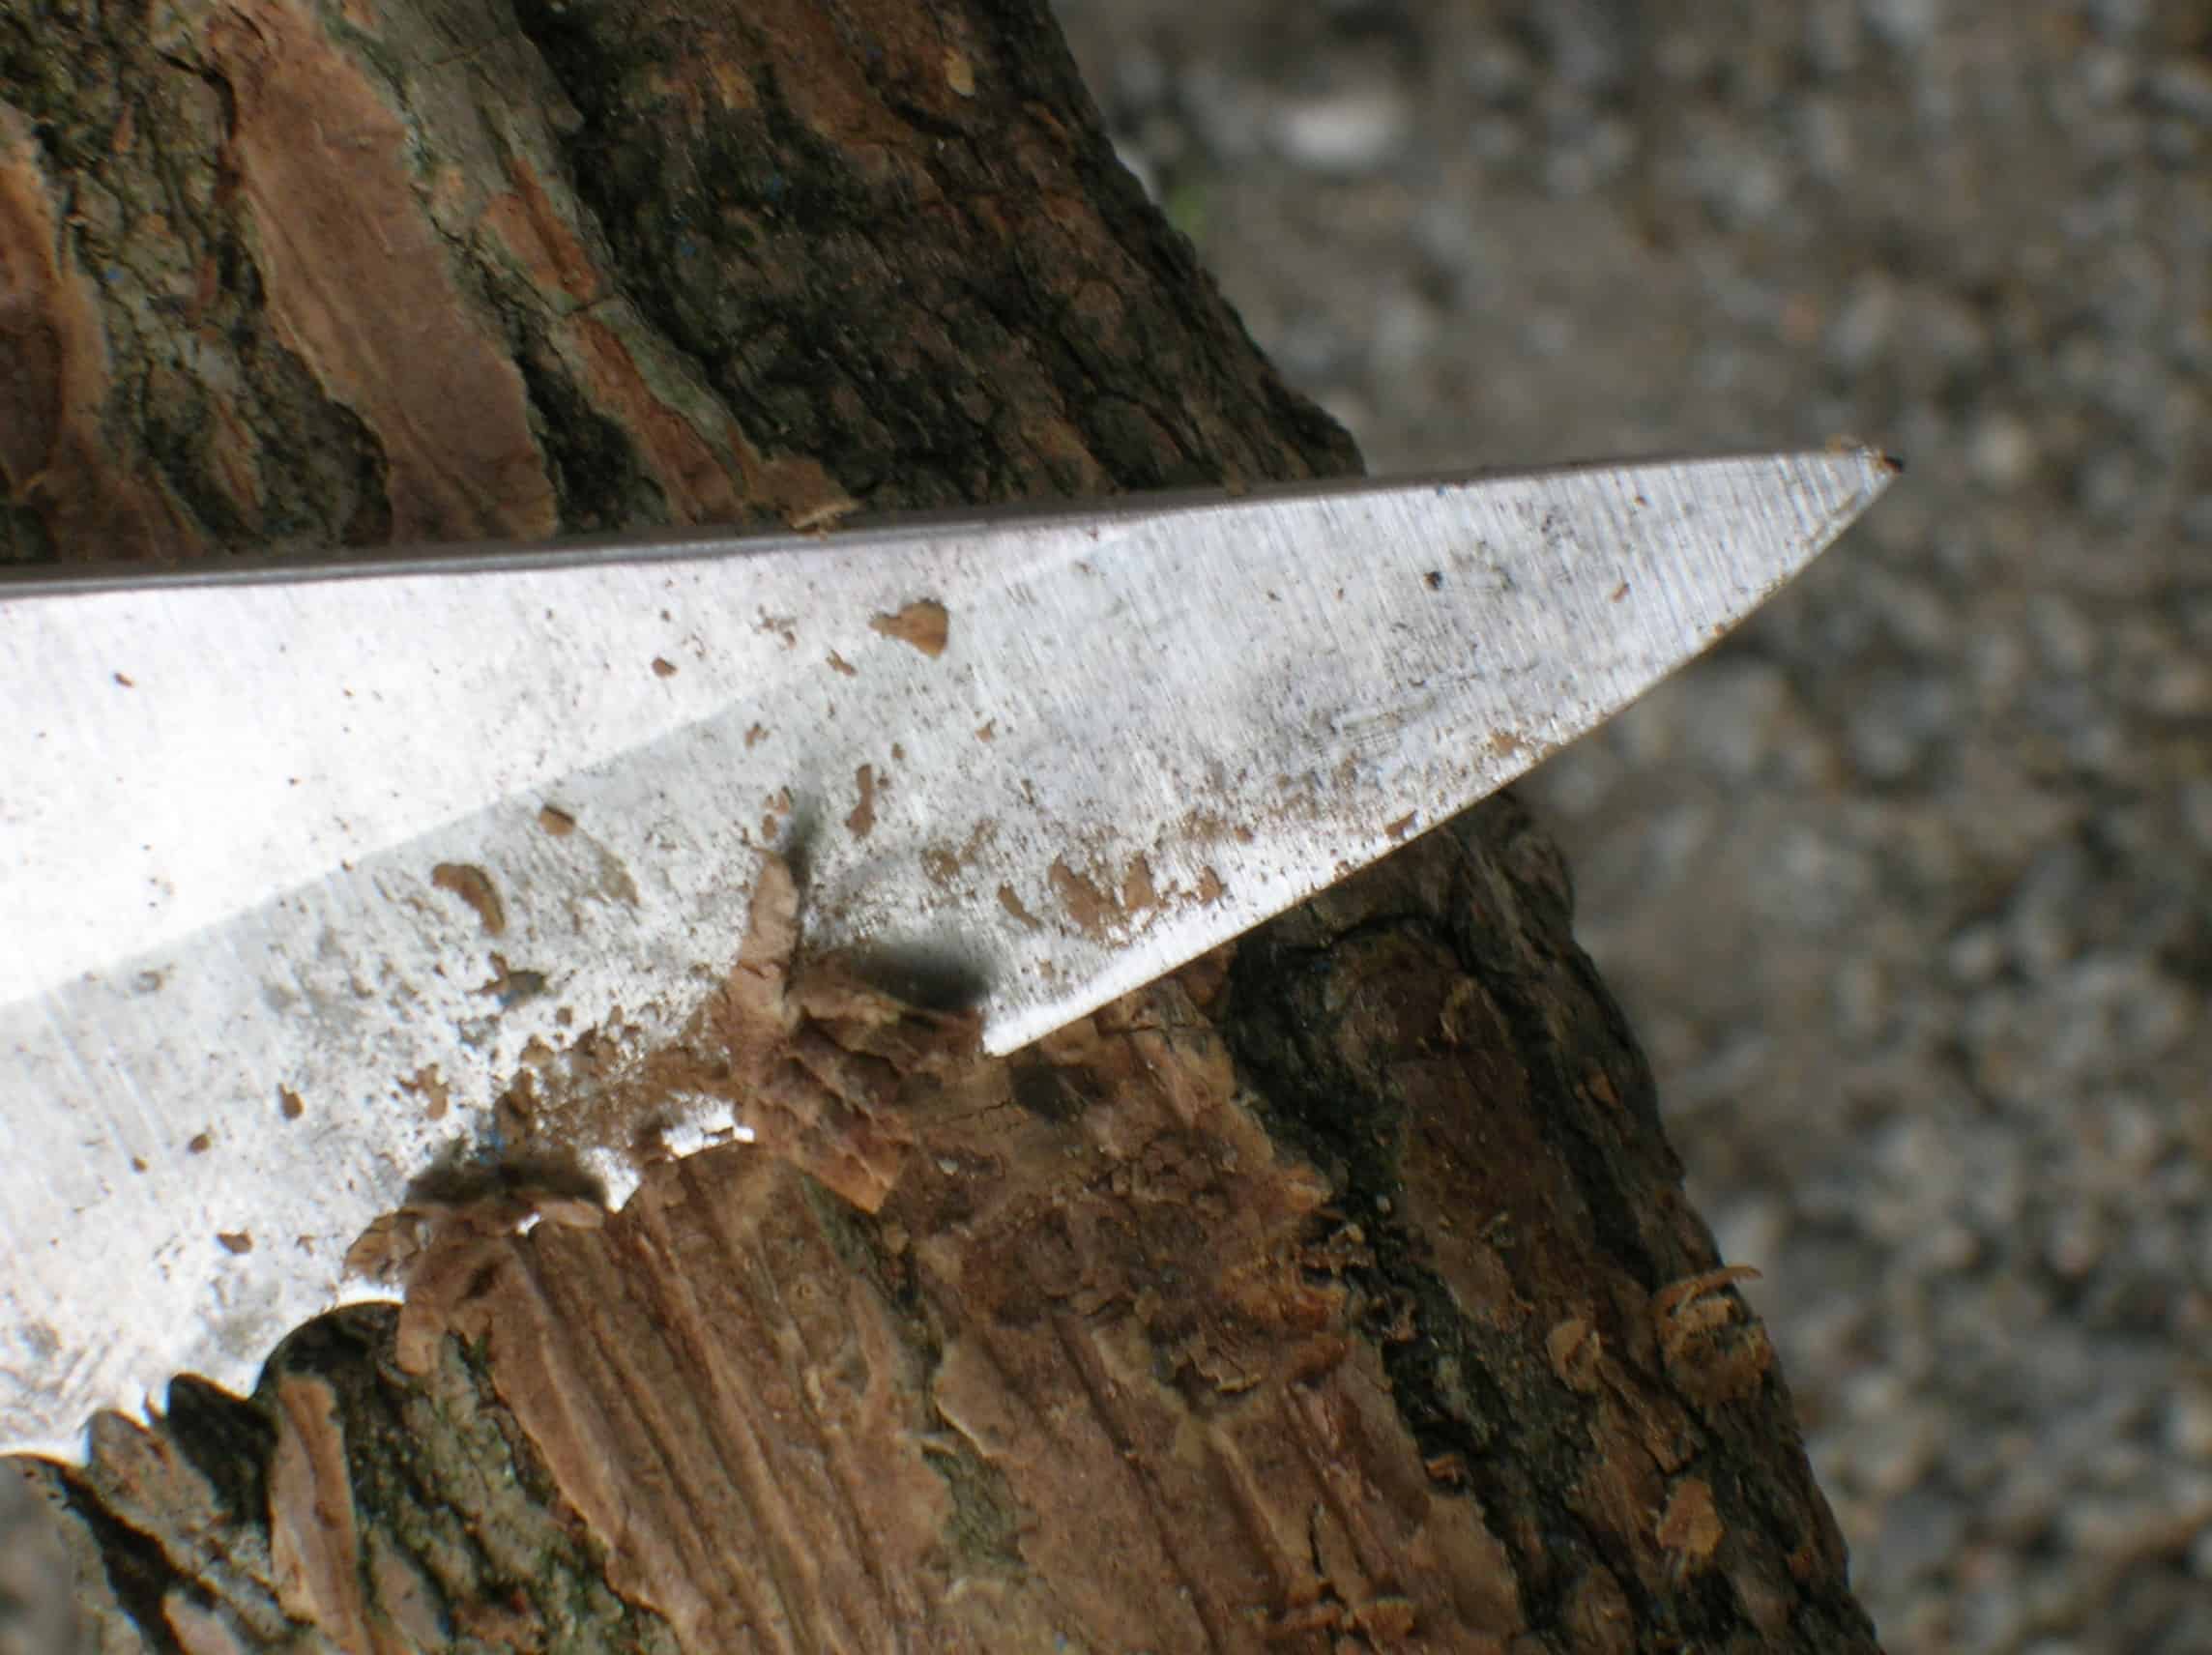 Wood cutting pocket knife, how to tell if a knife is sharp